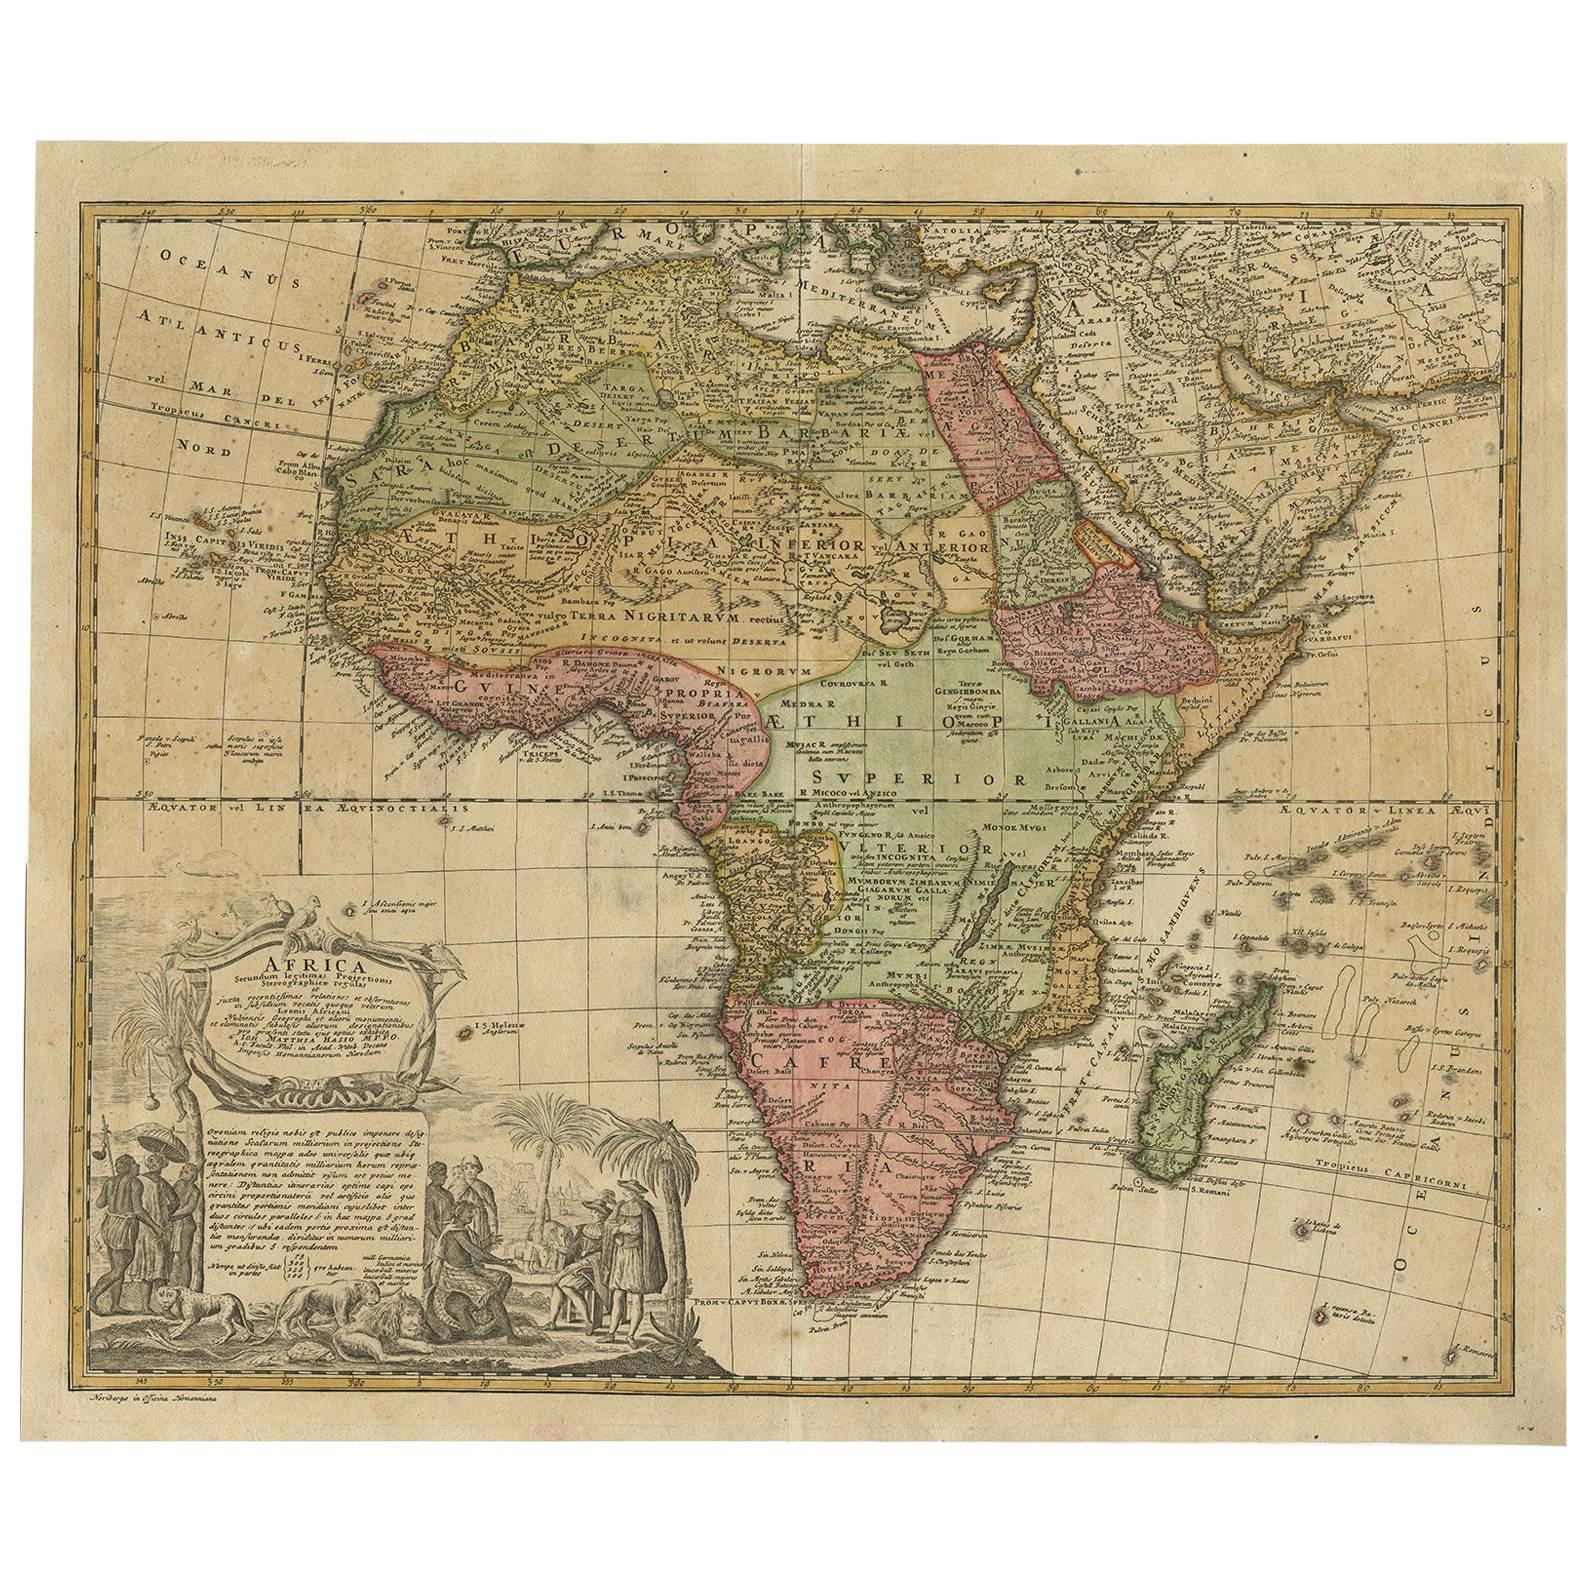 Antique Map of Africa by Homann Heirs, circa 1737